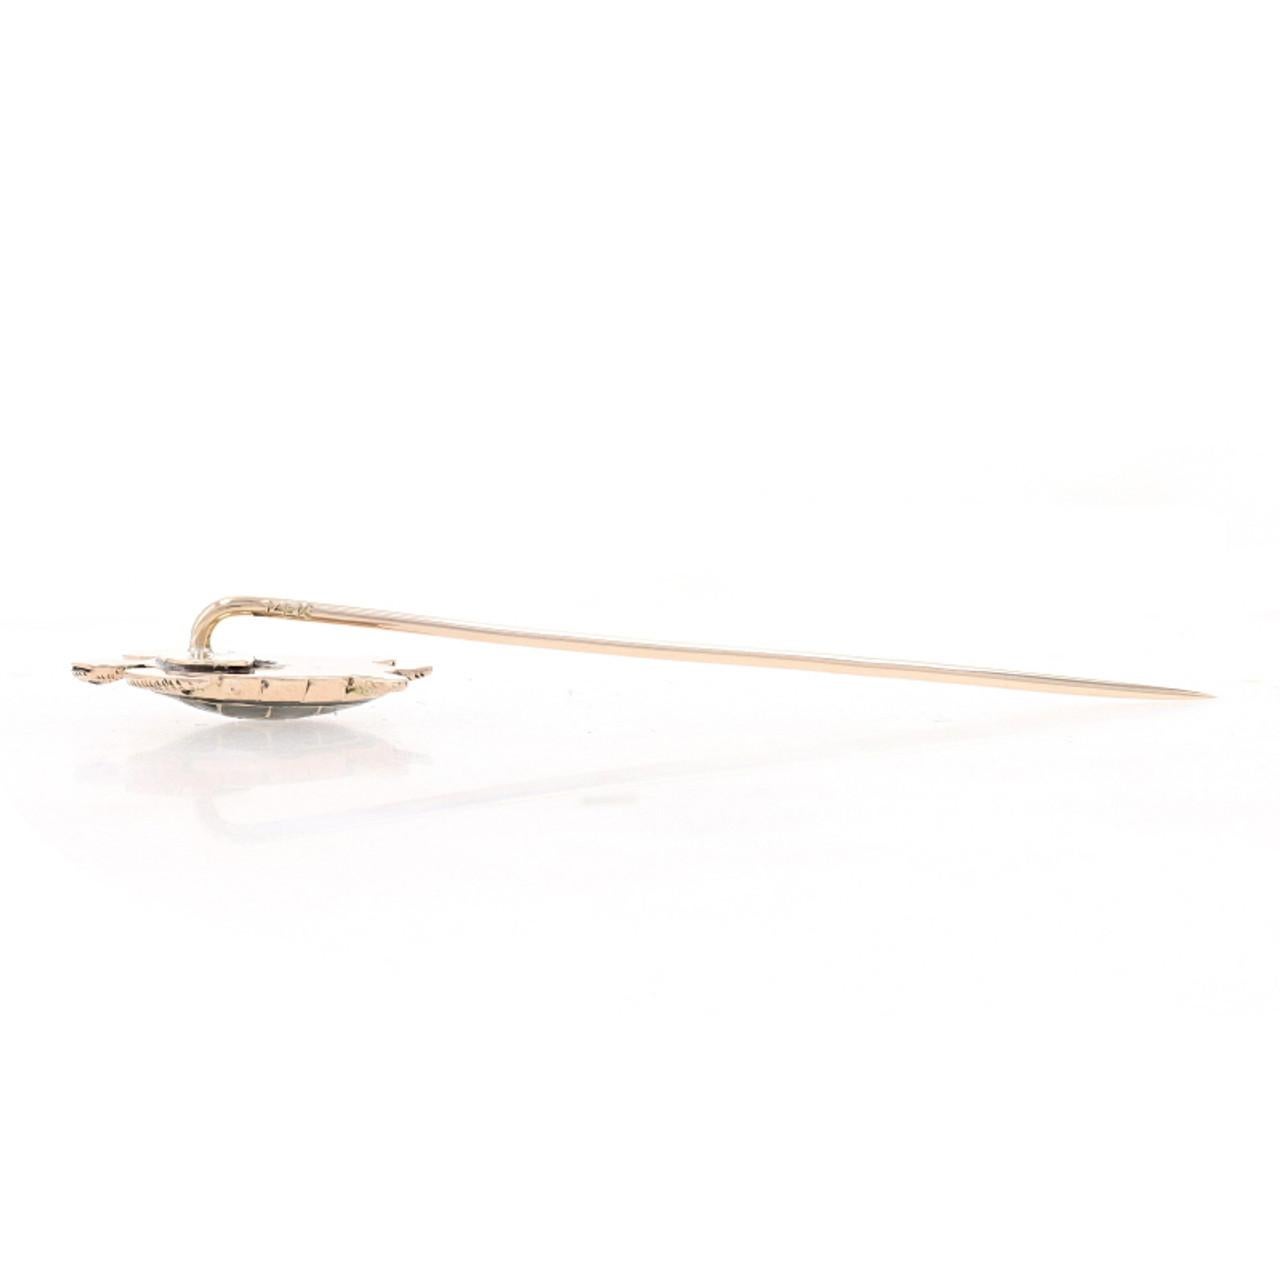 Yellow Gold Vintage Sea Turtle Stickpin 14k Ocean Life Reptile Green Enamel

Additional Information:
Materials: Metal 14k Yellow Gold, Enamel
Color: Green
Era: Vintage
Theme: Sea Turtle, Ocean Life
Features: Smooth & Textured Finishes
Dimensions: